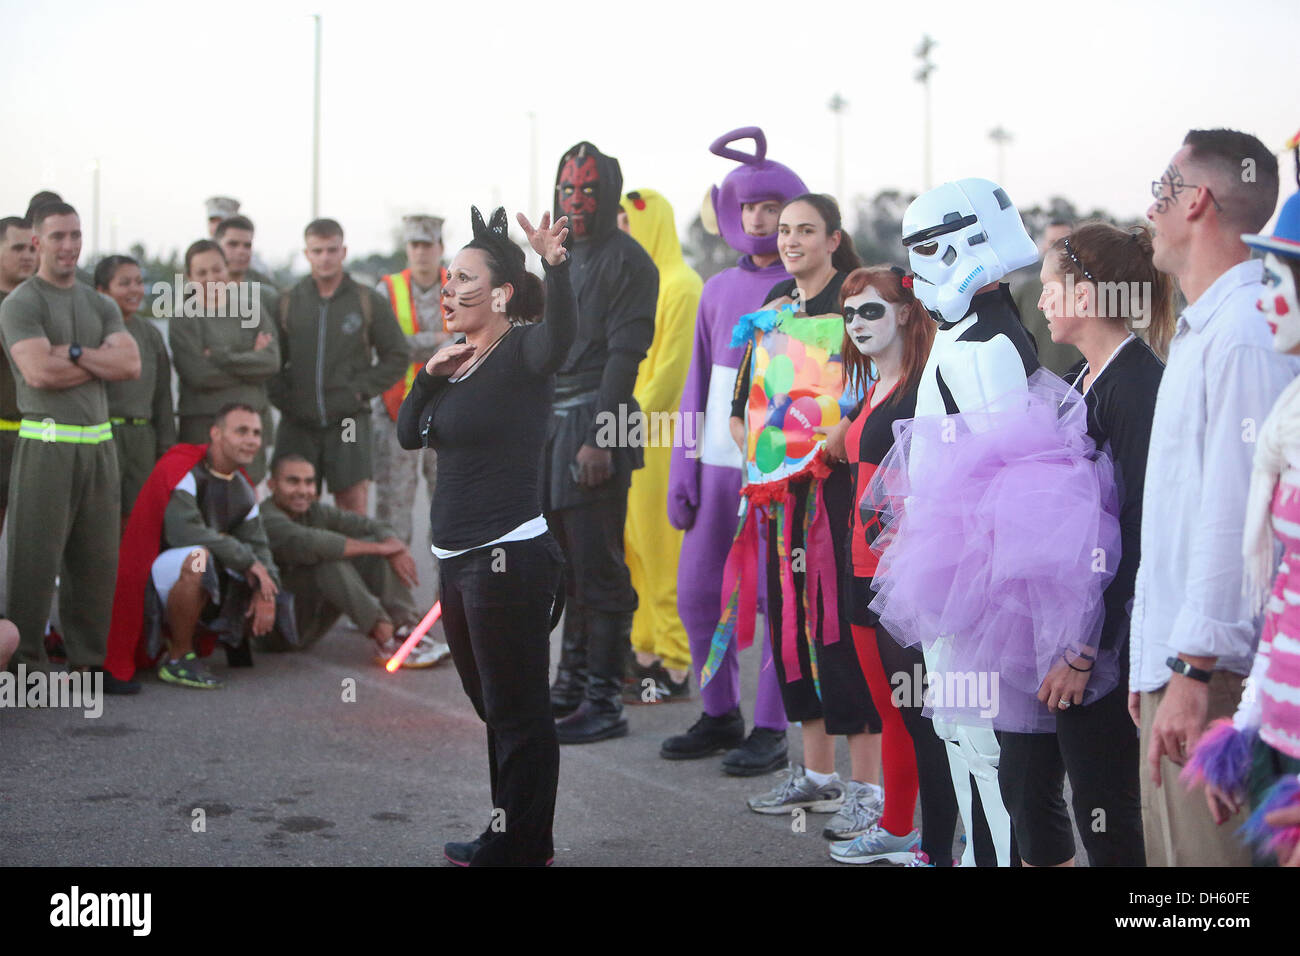 Gunnery Sgt. Joanna H. Mendoza, Headquarters Company gunnery sergeant, Combat Logistics Regiment 17, 1st Marine Logistics Group, holds a costume competition at the end of a Halloween-themed physical training circuit aboard Camp Pendleton, Calif., Oct. 30, Stock Photo